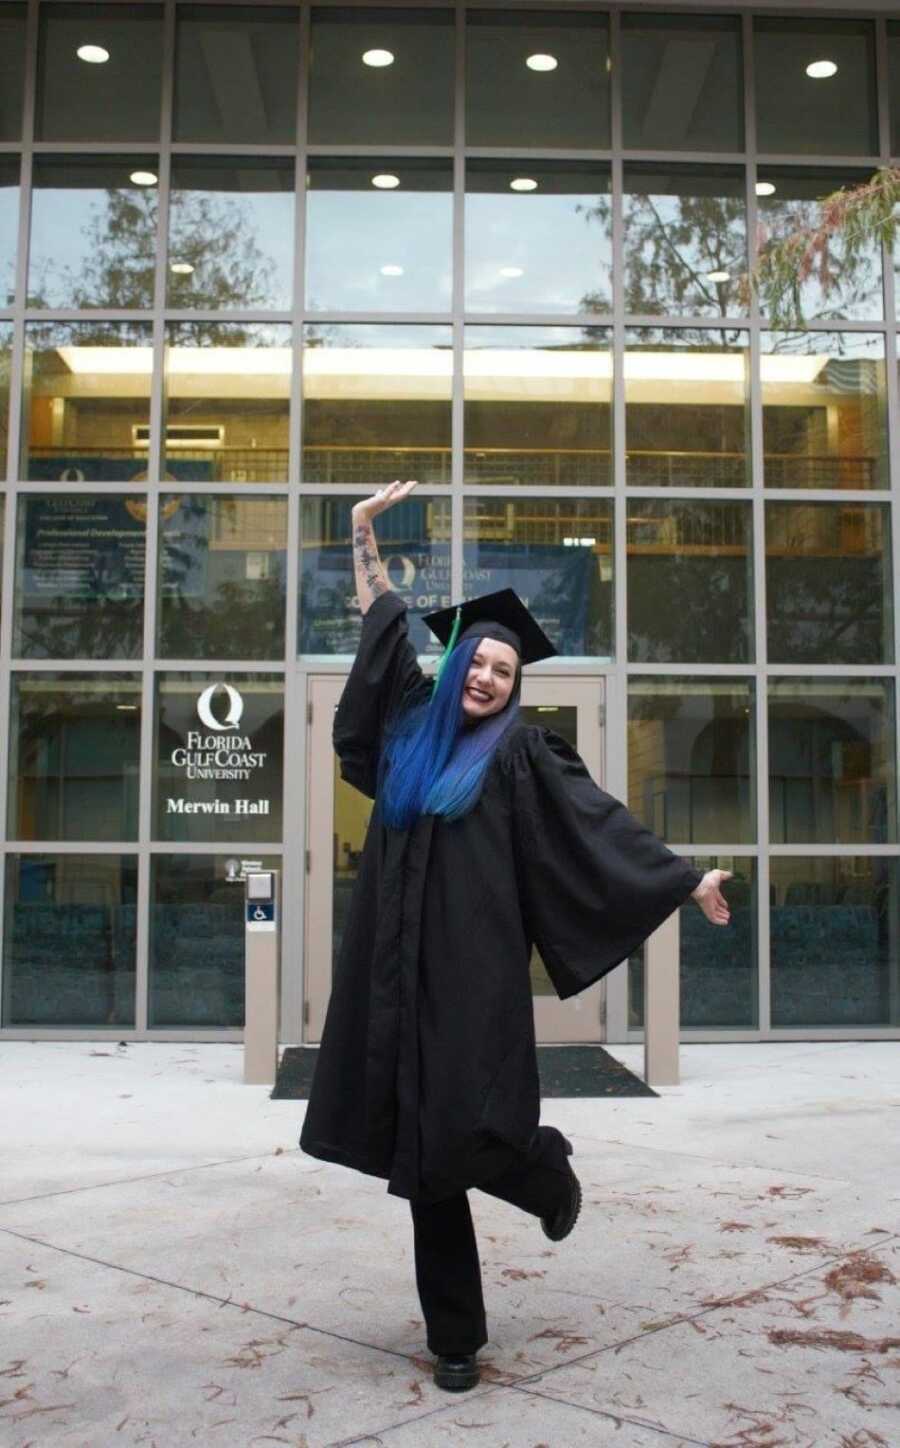 domestic abuse survivor wearing graduation cap and gown in front of school